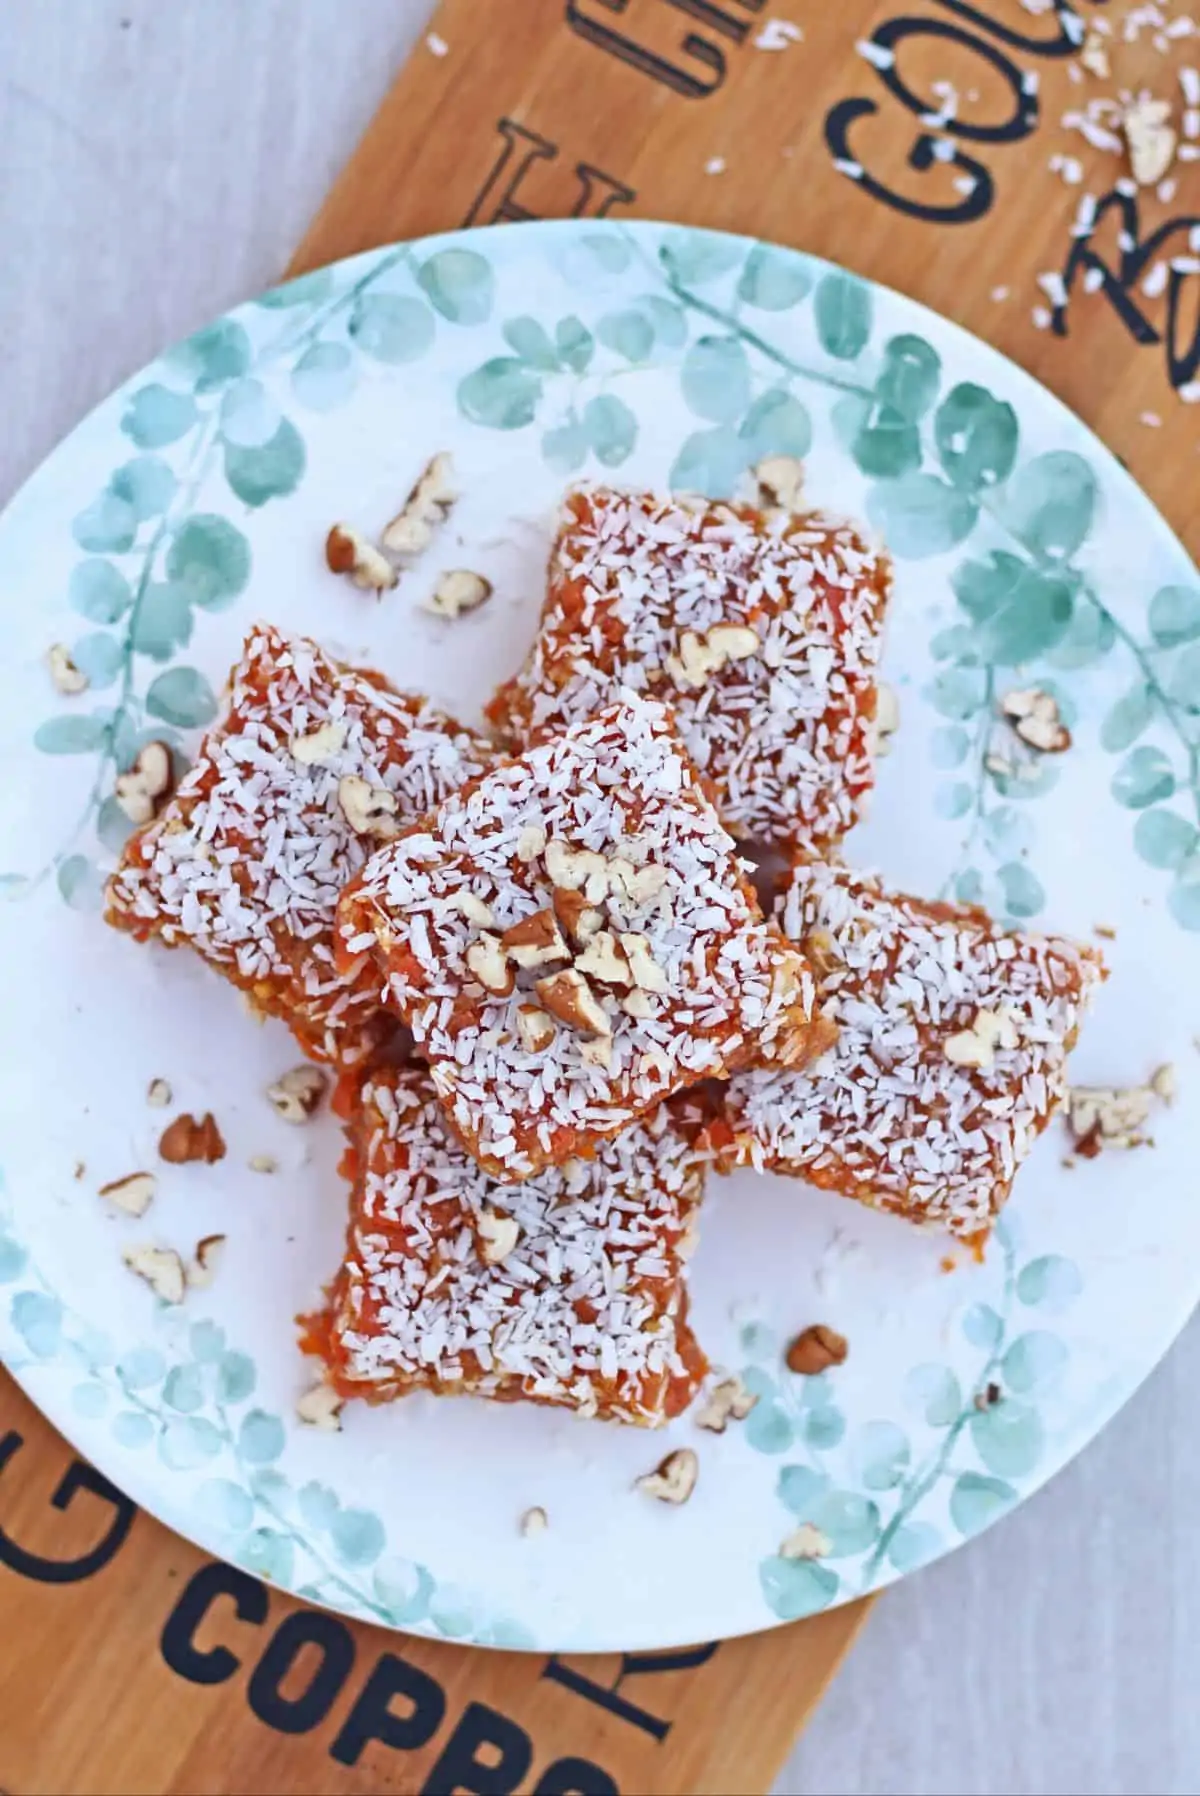 Carrot and walnut bars in a plate garnished with coconut and nuts